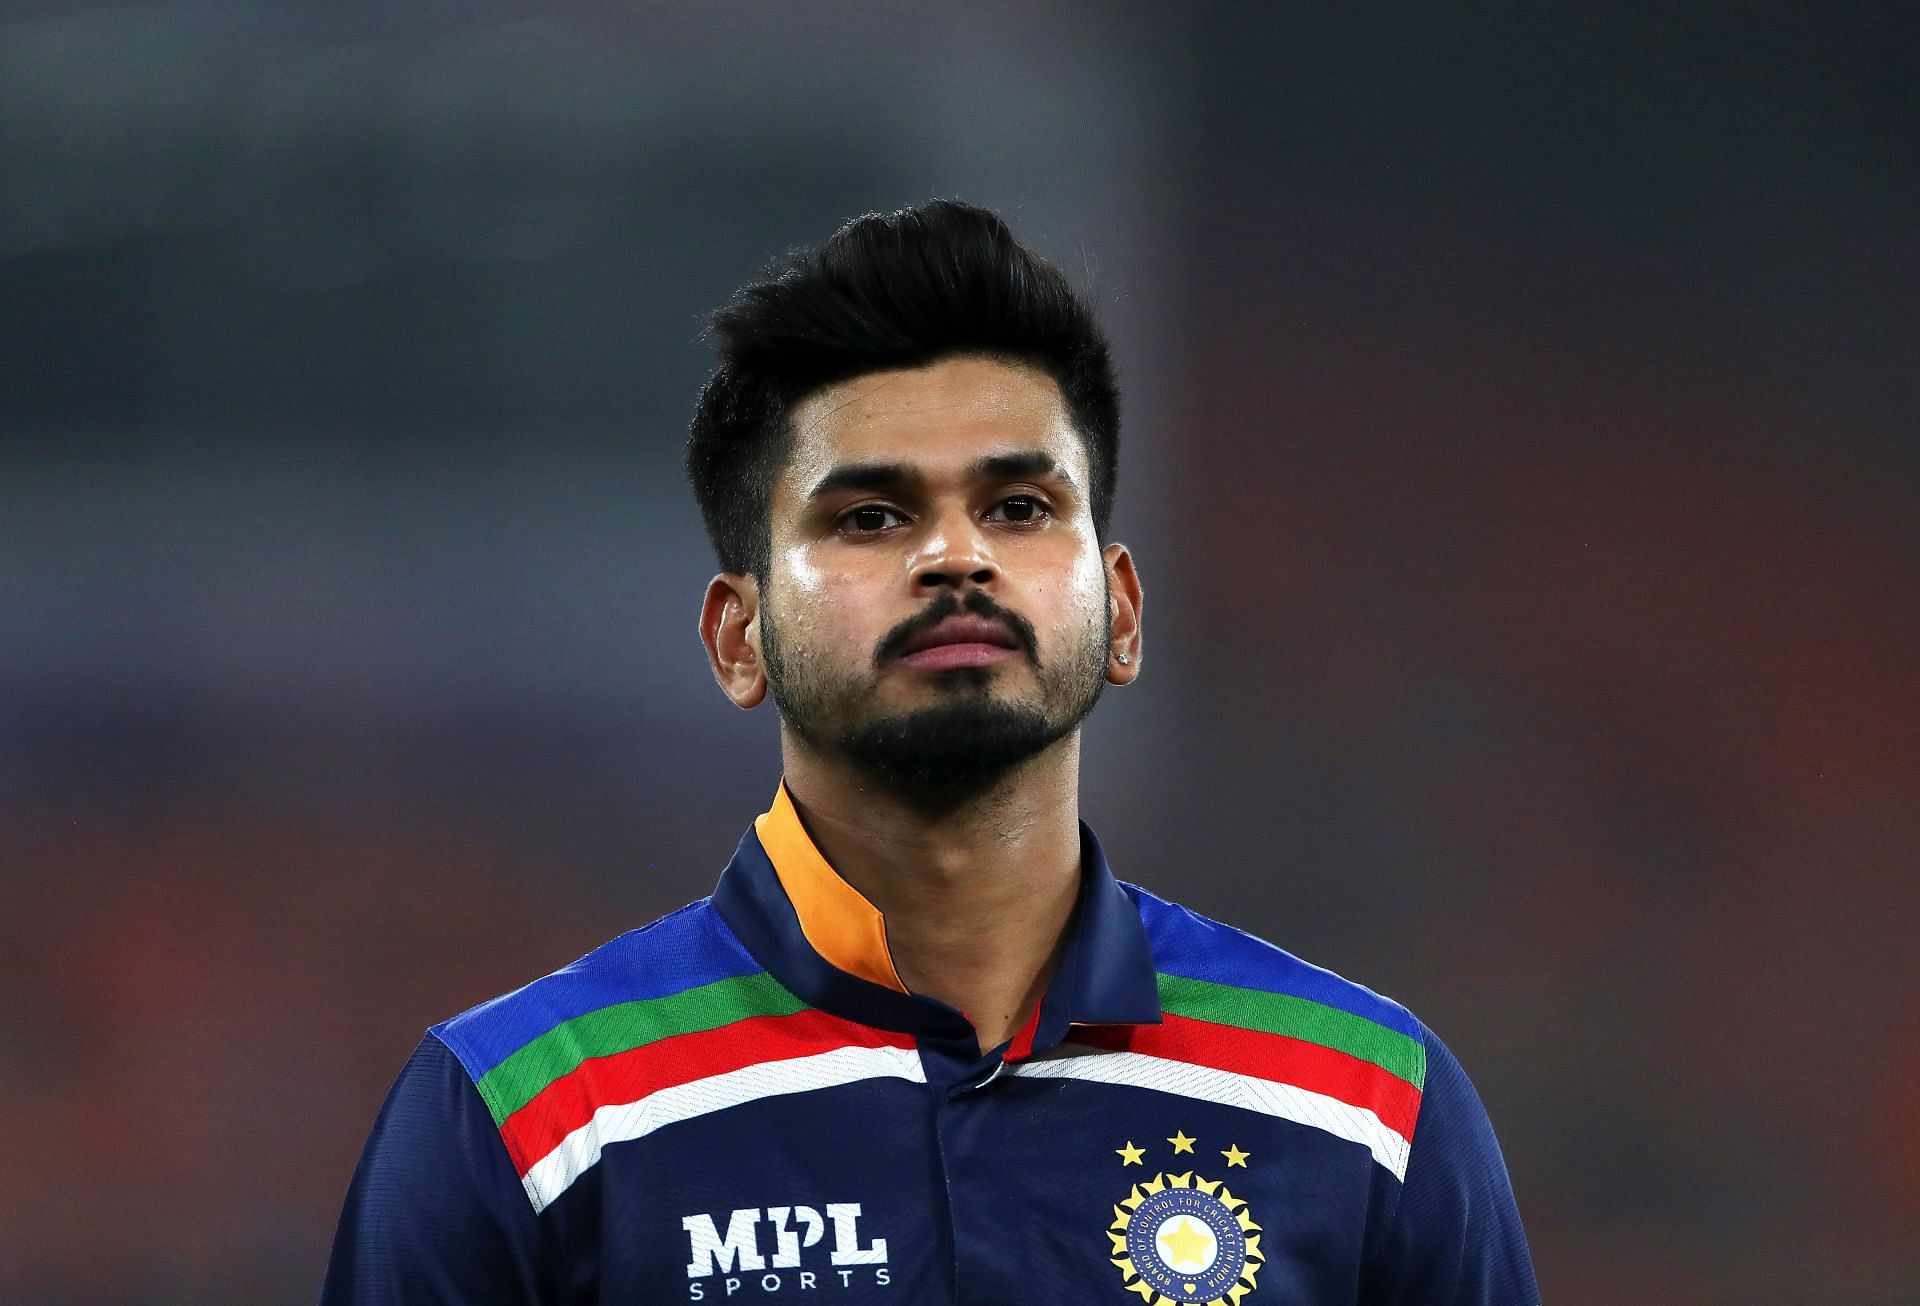 Shreyas Iyer was the Player of the Series in the T20I series against Sri Lanka.